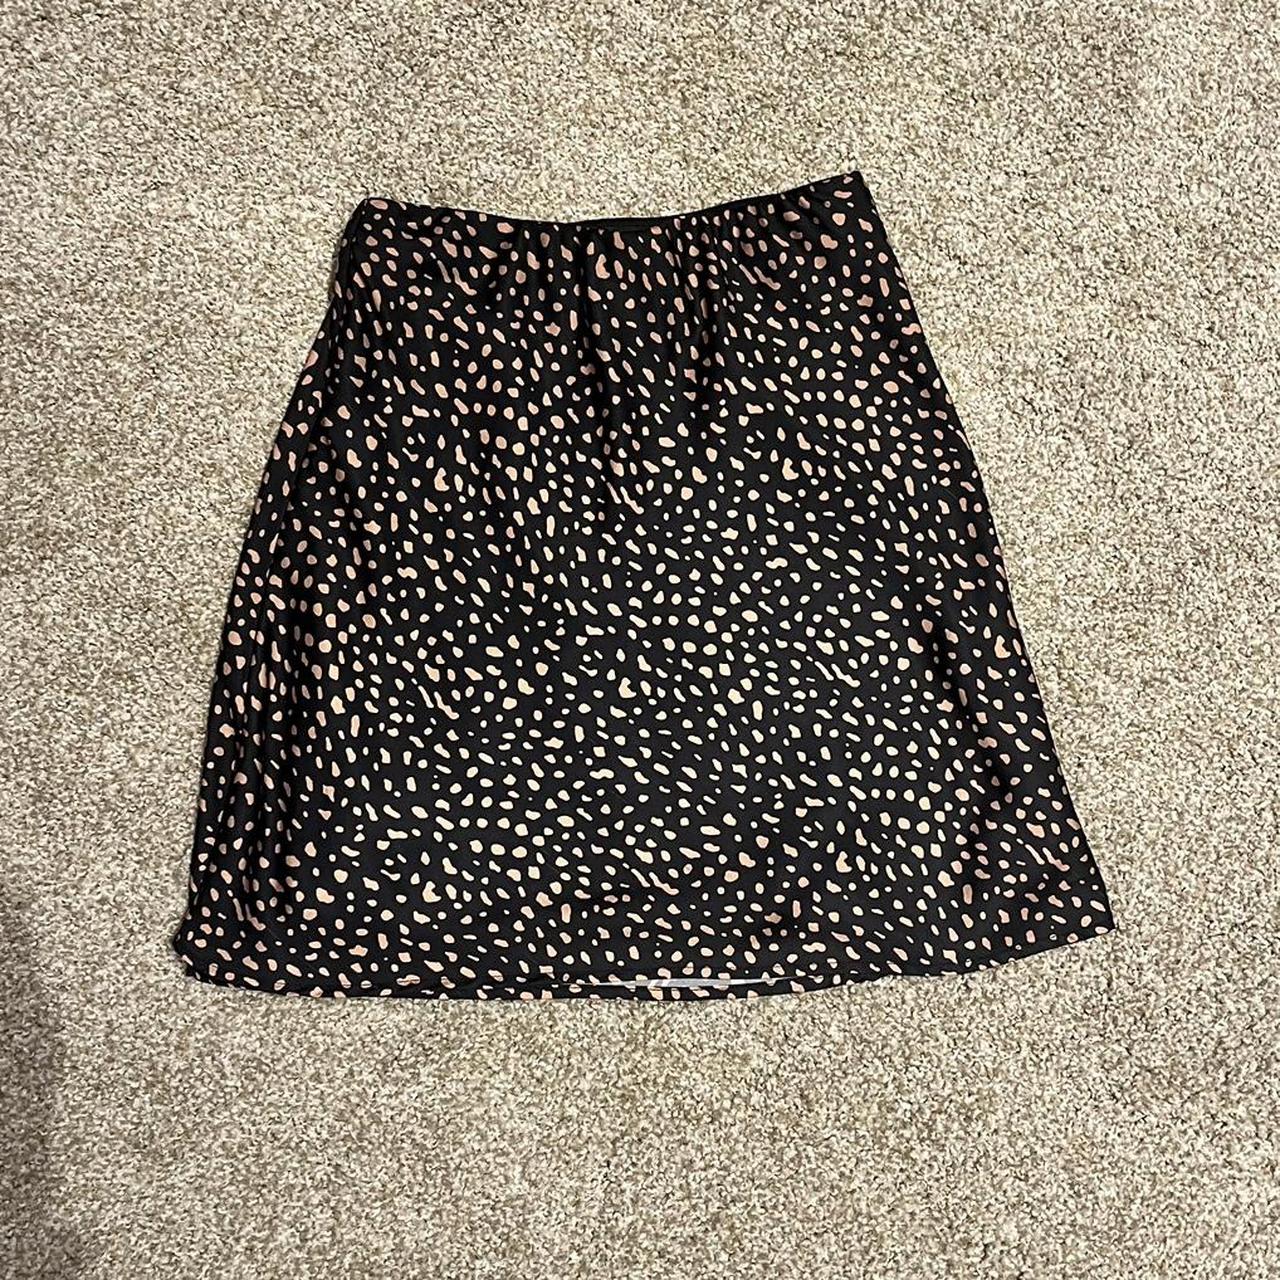 Urban Outfitters silky mini skirt! Great skirt with... - Depop